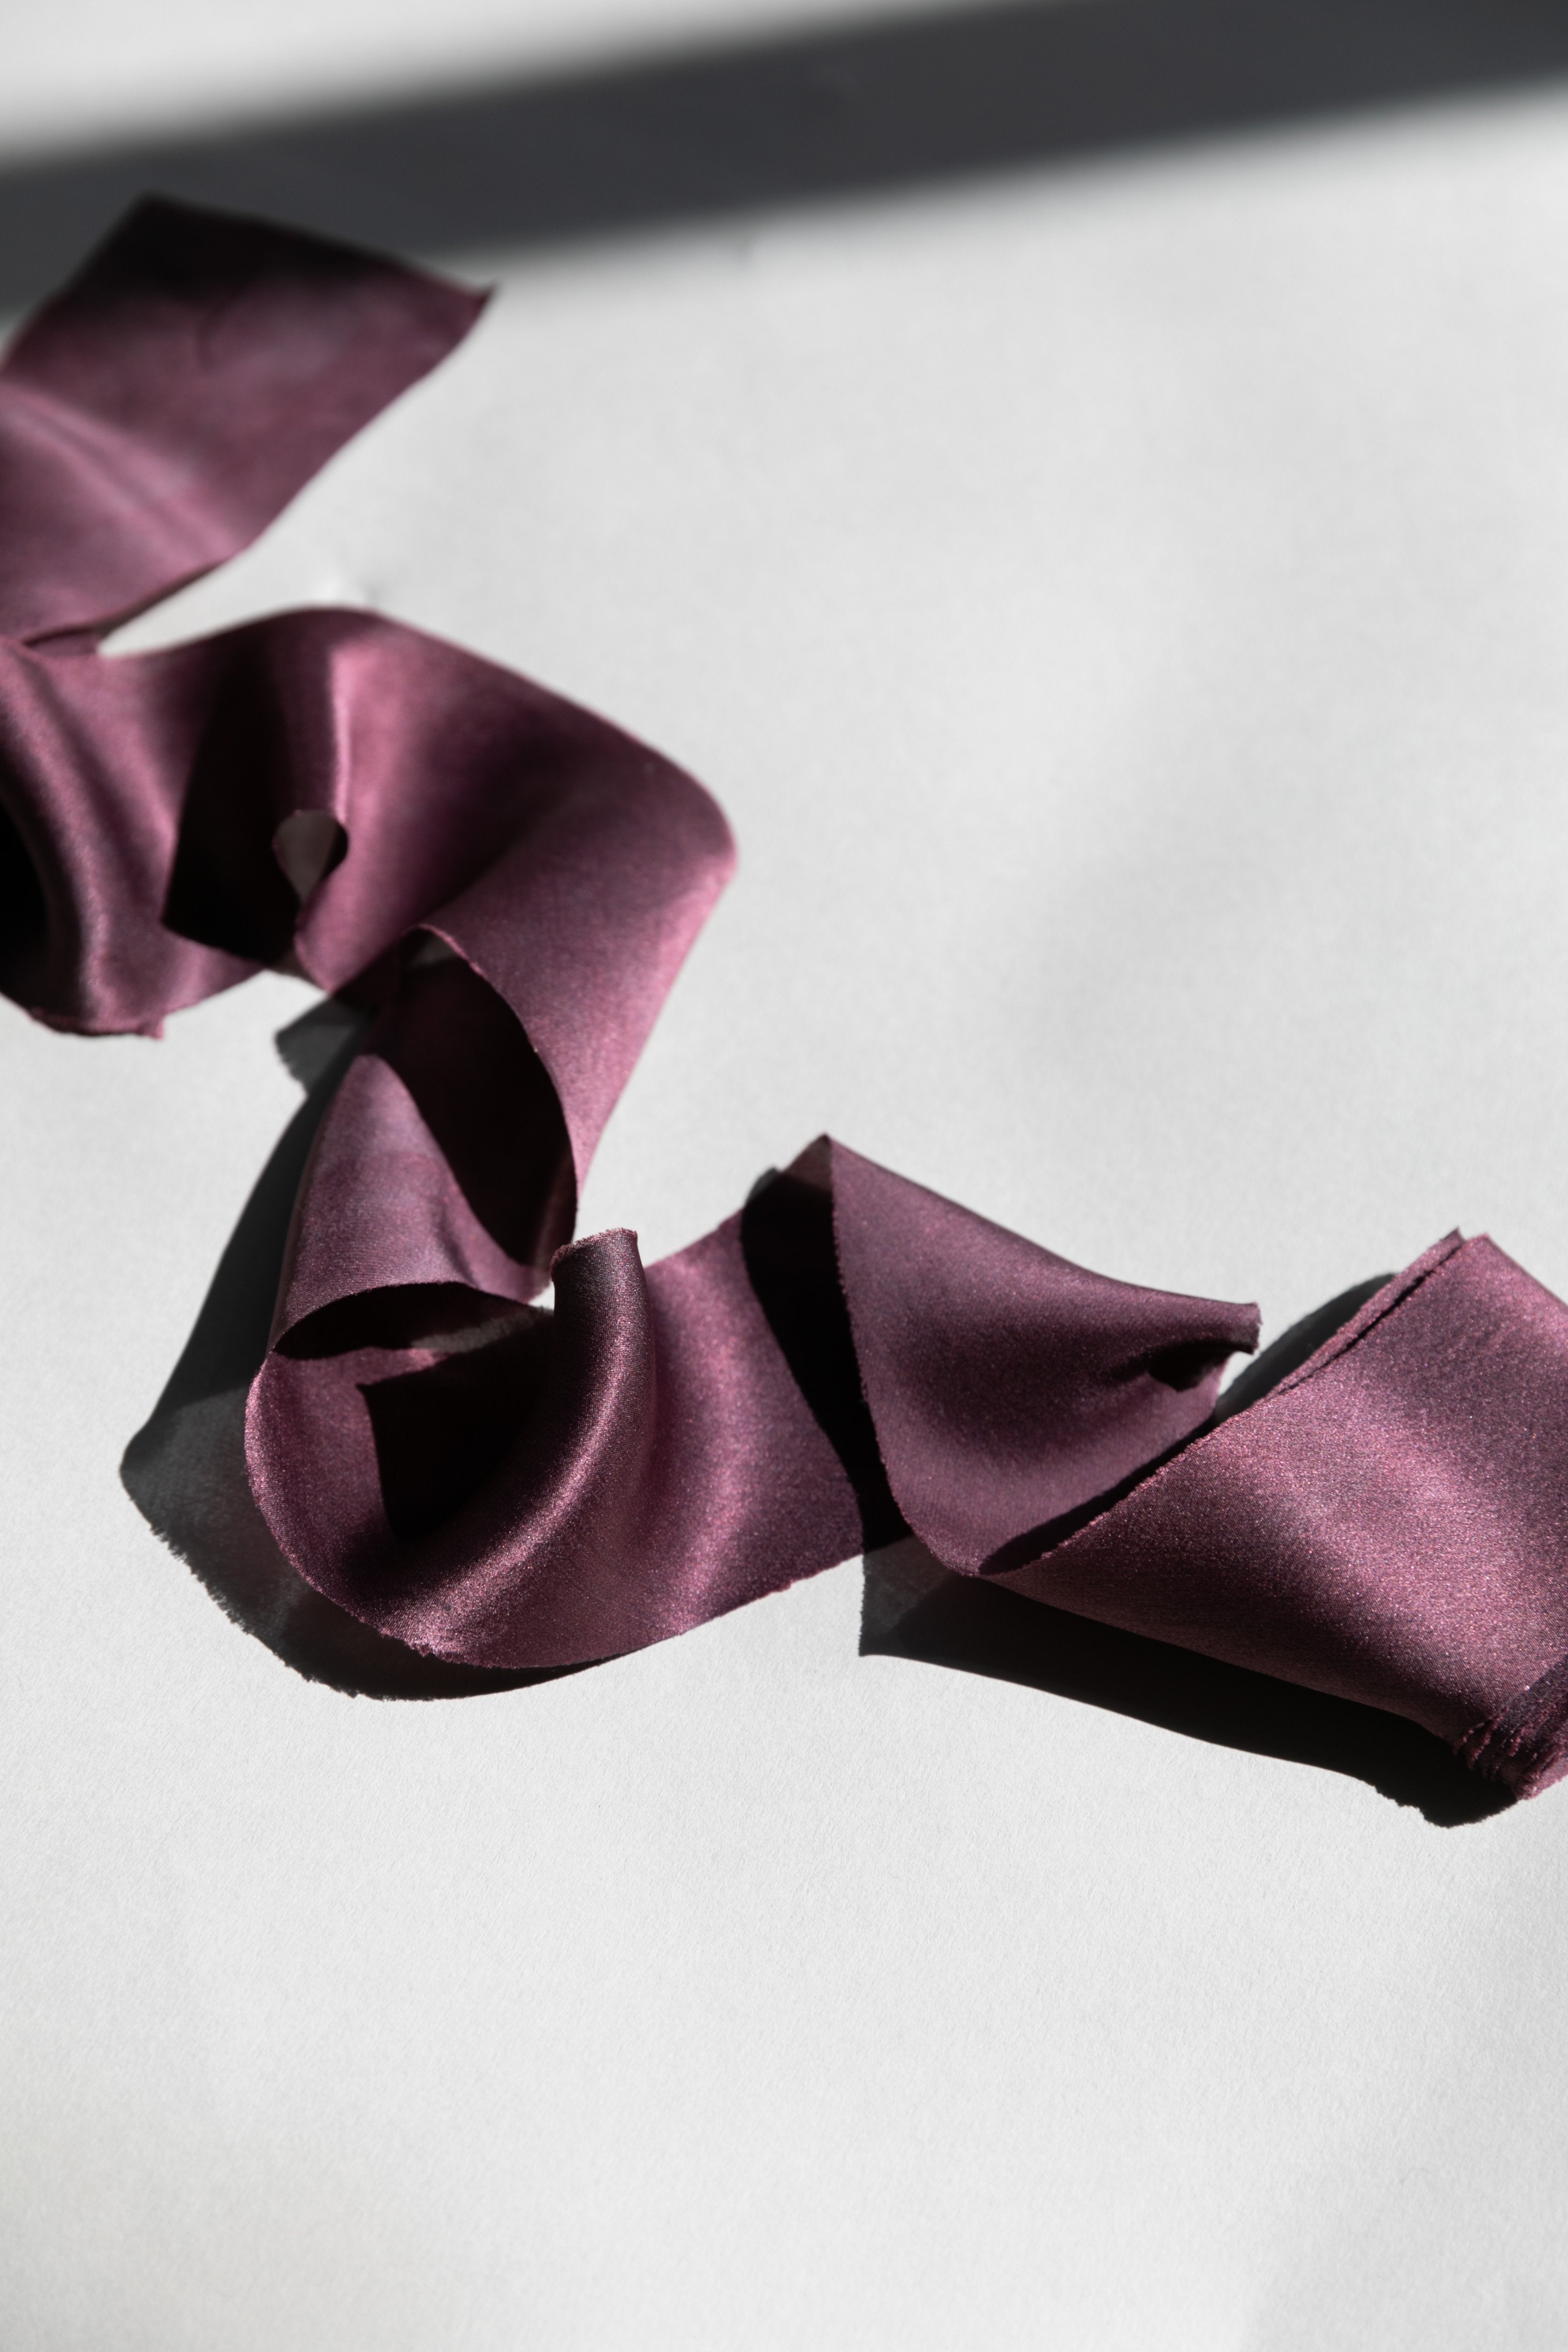 Download Eggplant Purple Silk Ribbons Plant Based Hand Dyed Feathers And Stone